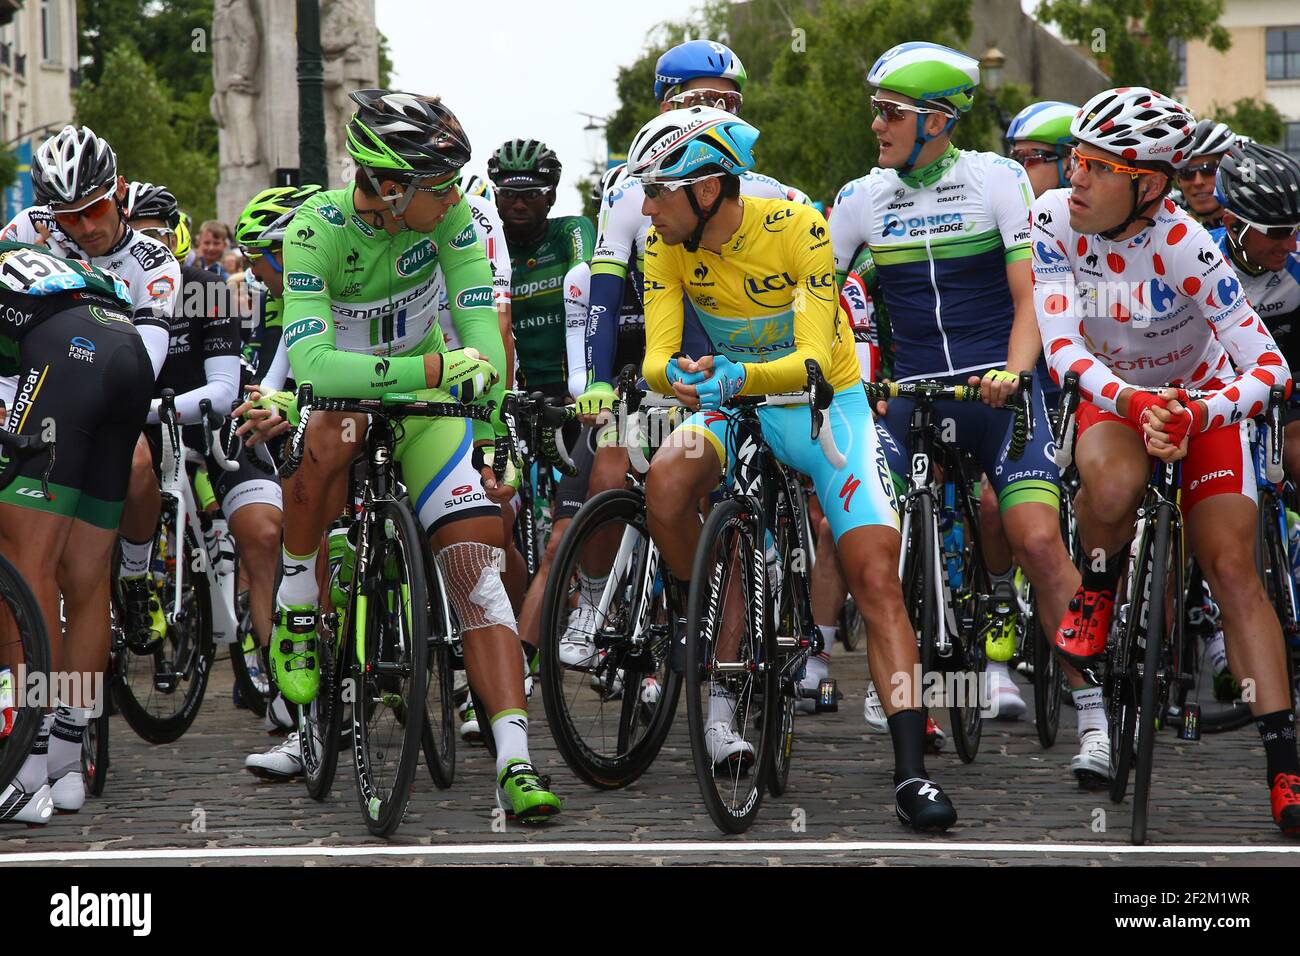 Peter Sagan of Slovakia riding for Cannondale (green jersey), Vincenzo  Nibali of Italy riding for Astana Pro Team (yellow jersey) and Cyril  Lemoine of France riding for Cofidis (polka dot jersey) are